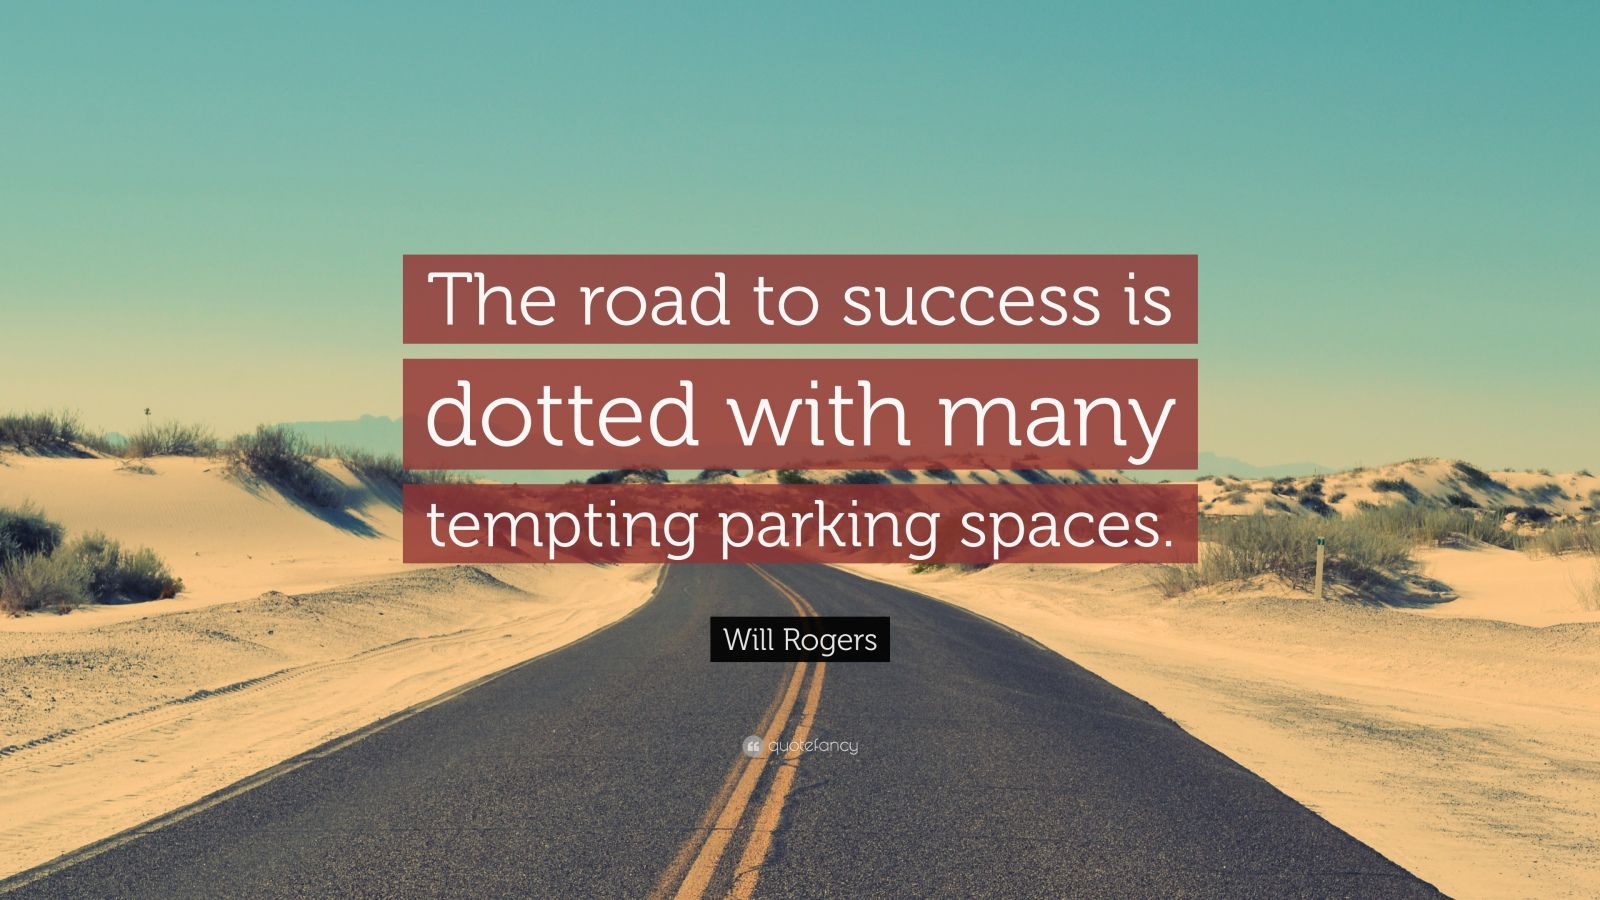 Will Rogers Quote: “The road to success is dotted with many tempting